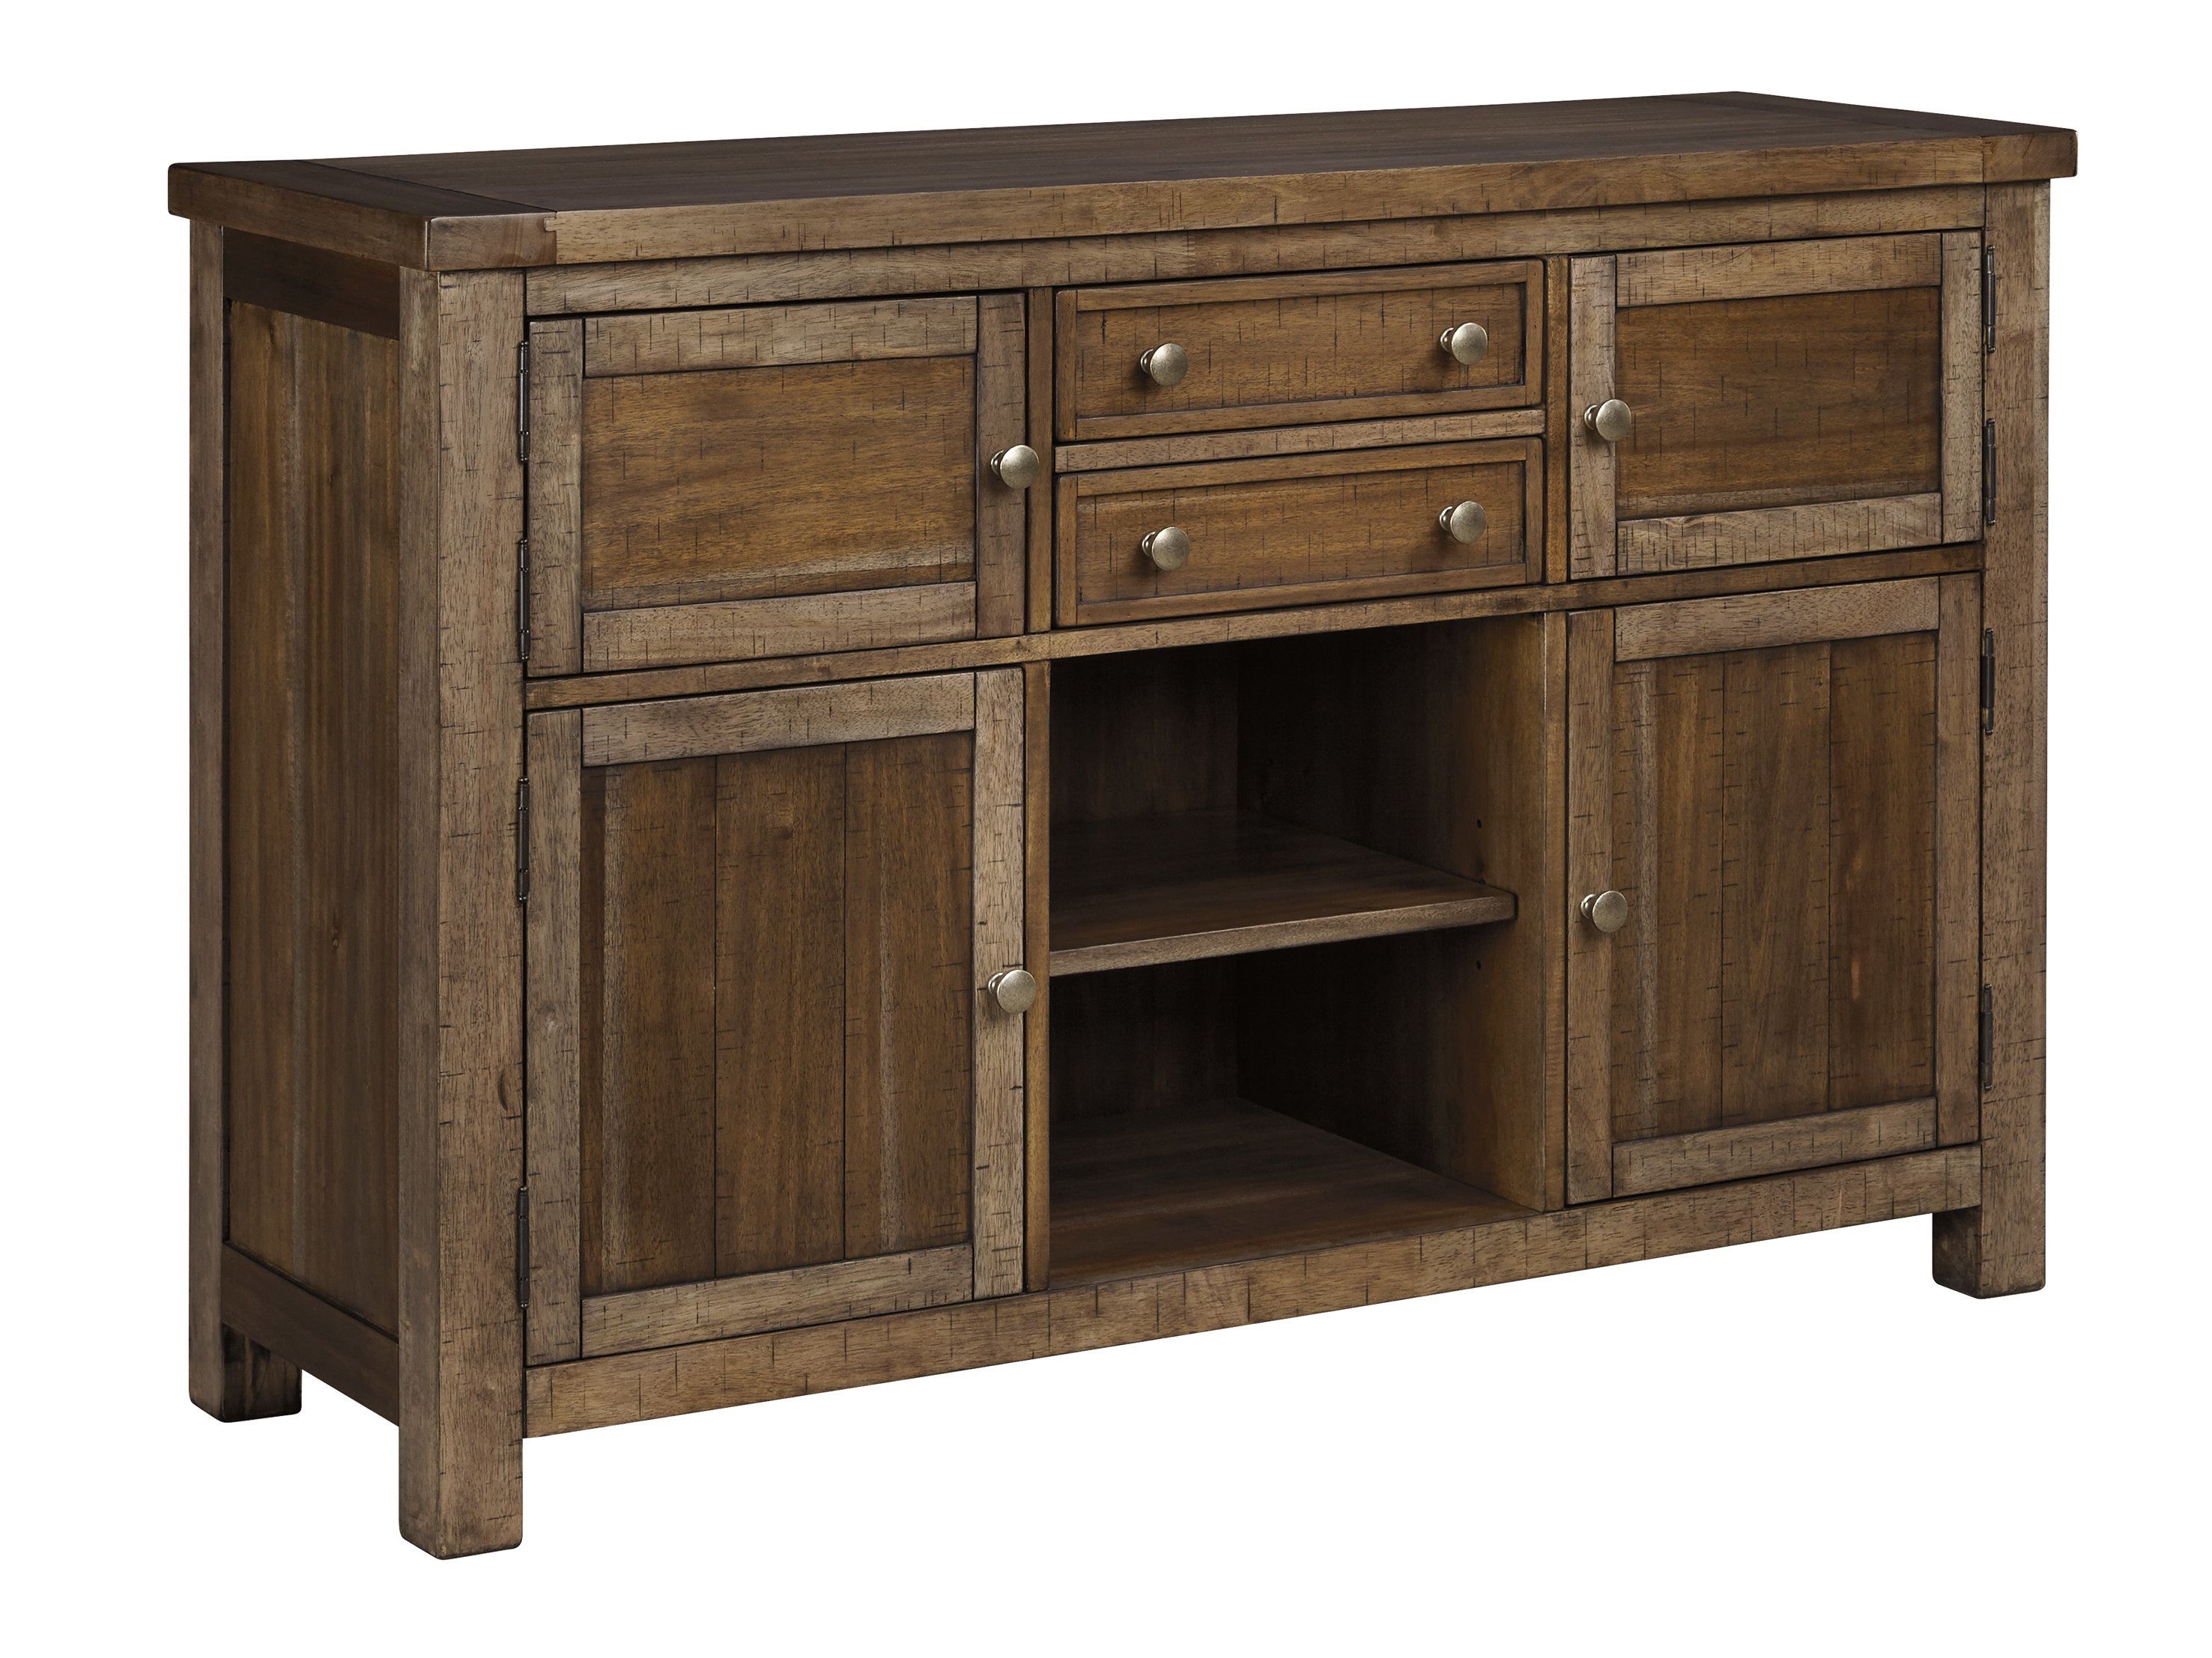 Hillary Dining Room Buffet Table Pertaining To Lanesboro Sideboards (View 11 of 30)